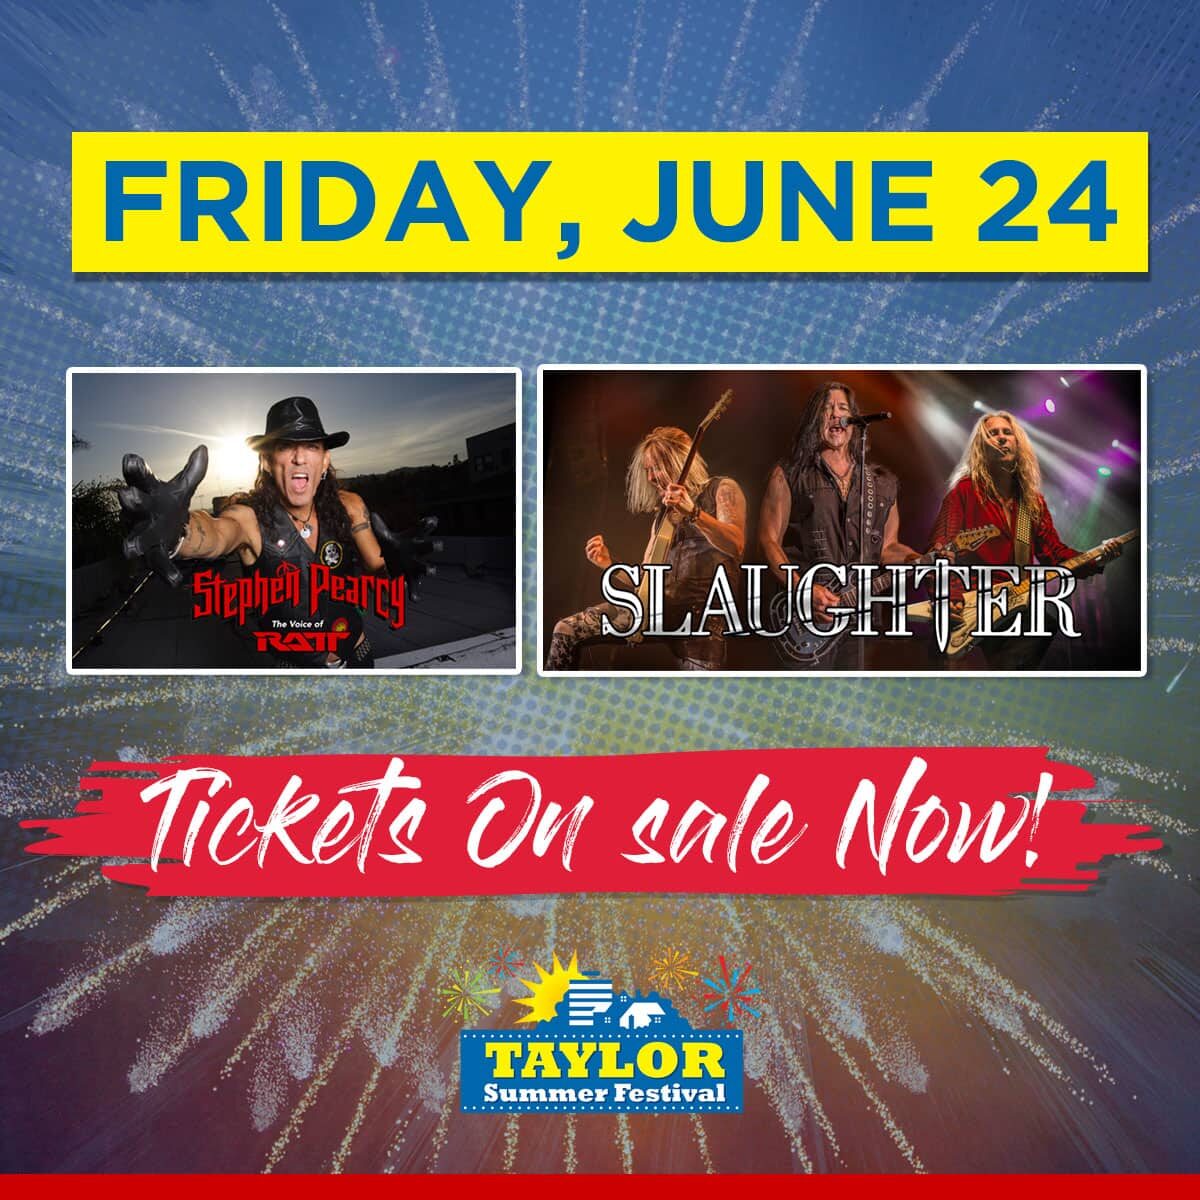 Flyer for Friday, June 24 Stephen Pearcy of Ratt and Slaughter, tickets on sale now!